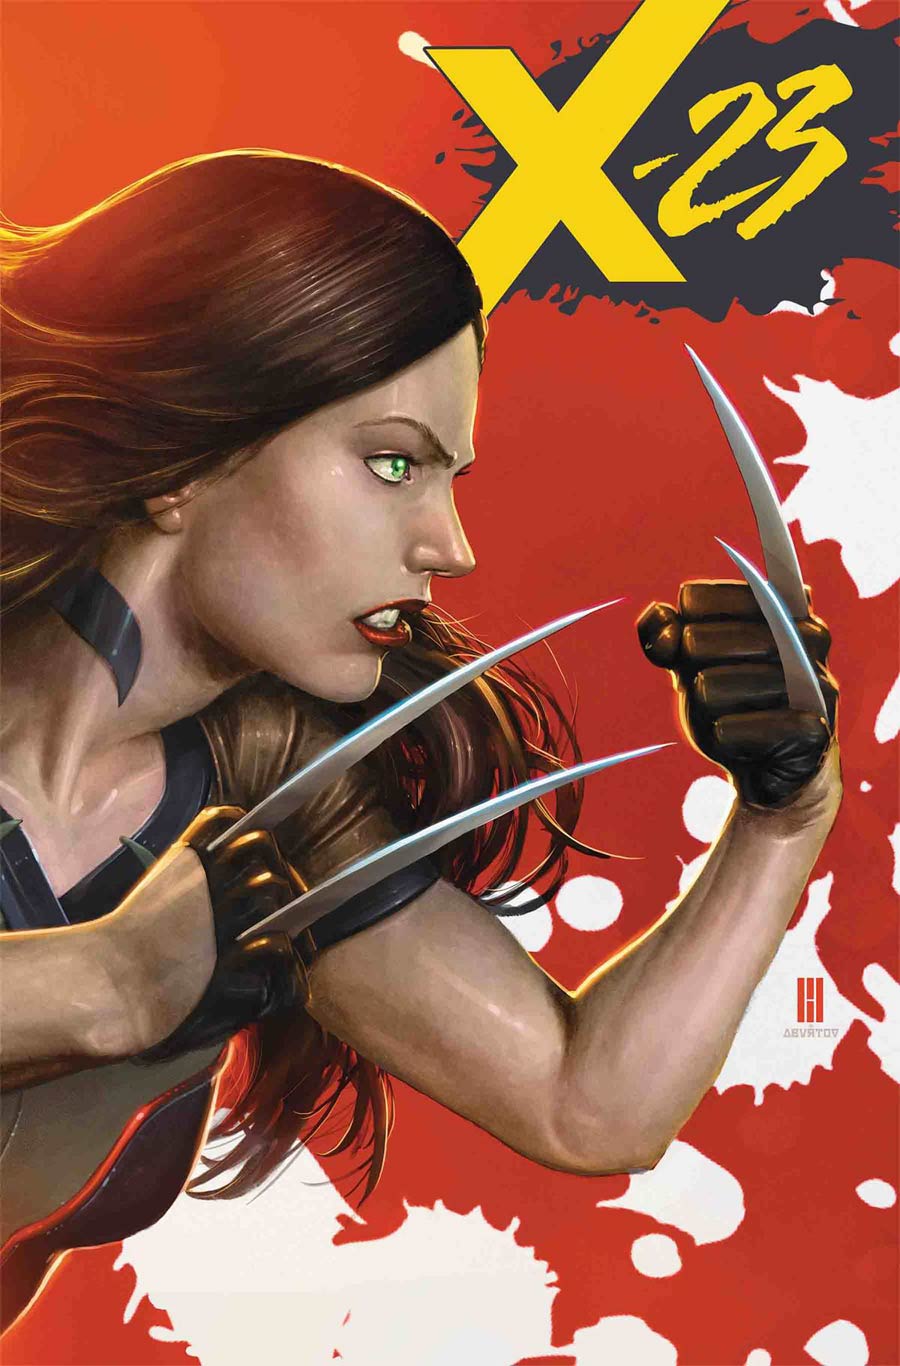 X-23 Vol 3 #1 By Mike Choi Poster